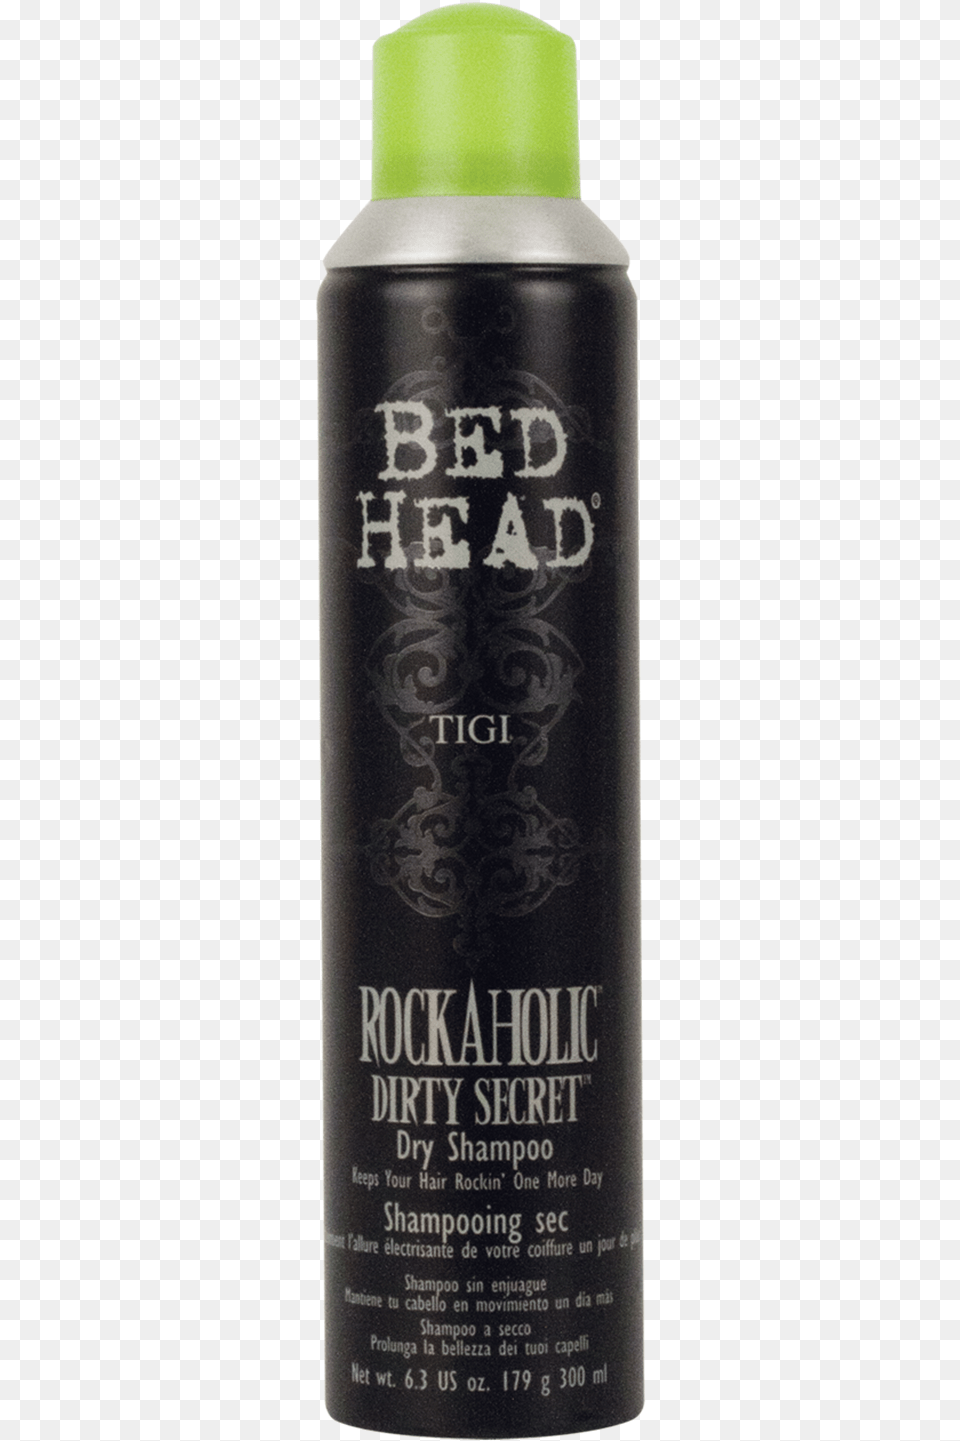 Rockaholic Dirty Secret Dry Shampoo Bed Head, Alcohol, Beer, Beverage, Cosmetics Png Image